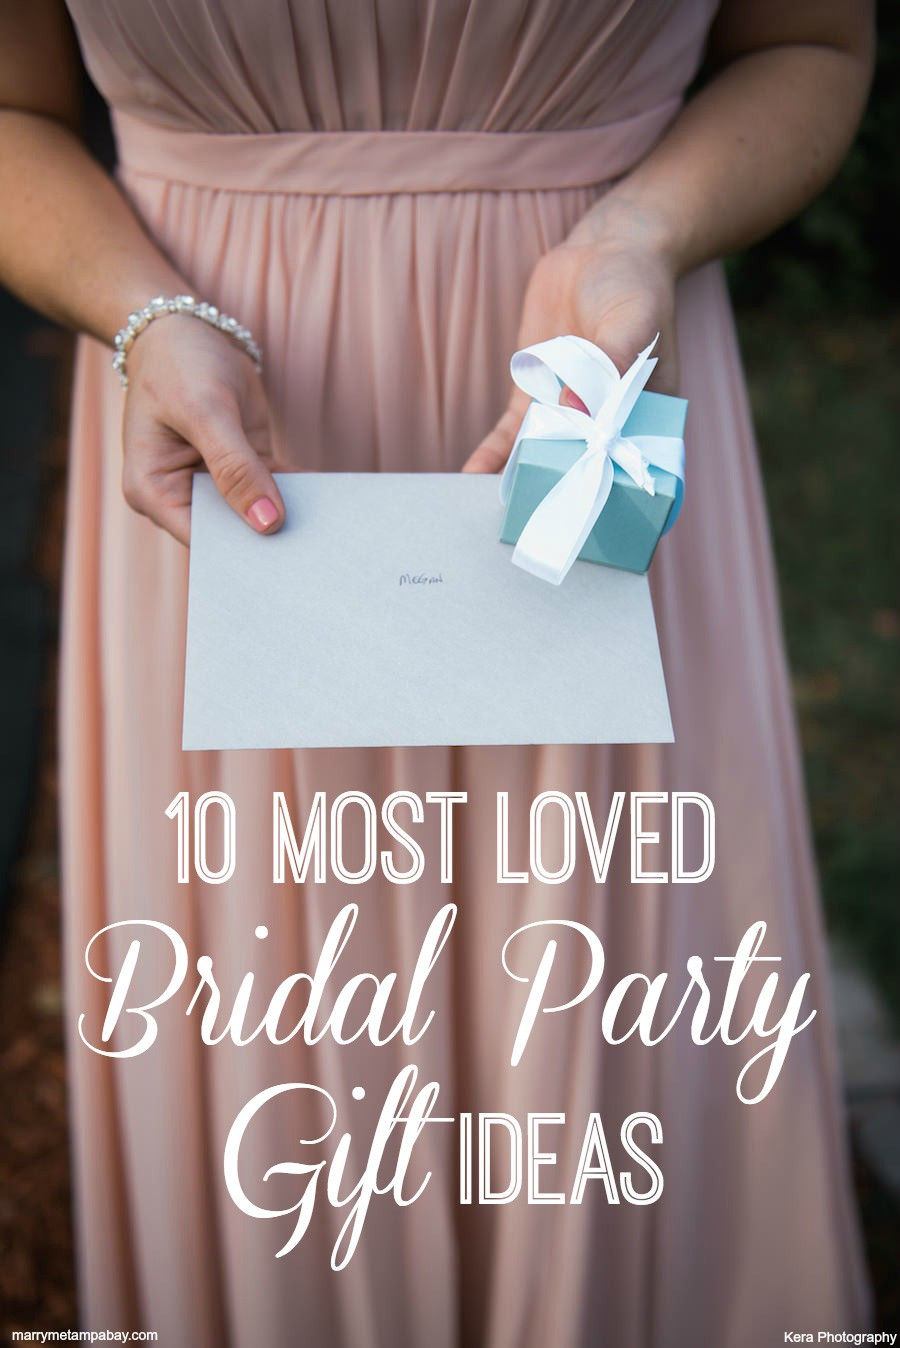 Gift Ideas For Wedding Party
 10 Most Loved Bridal Party Gift Ideas